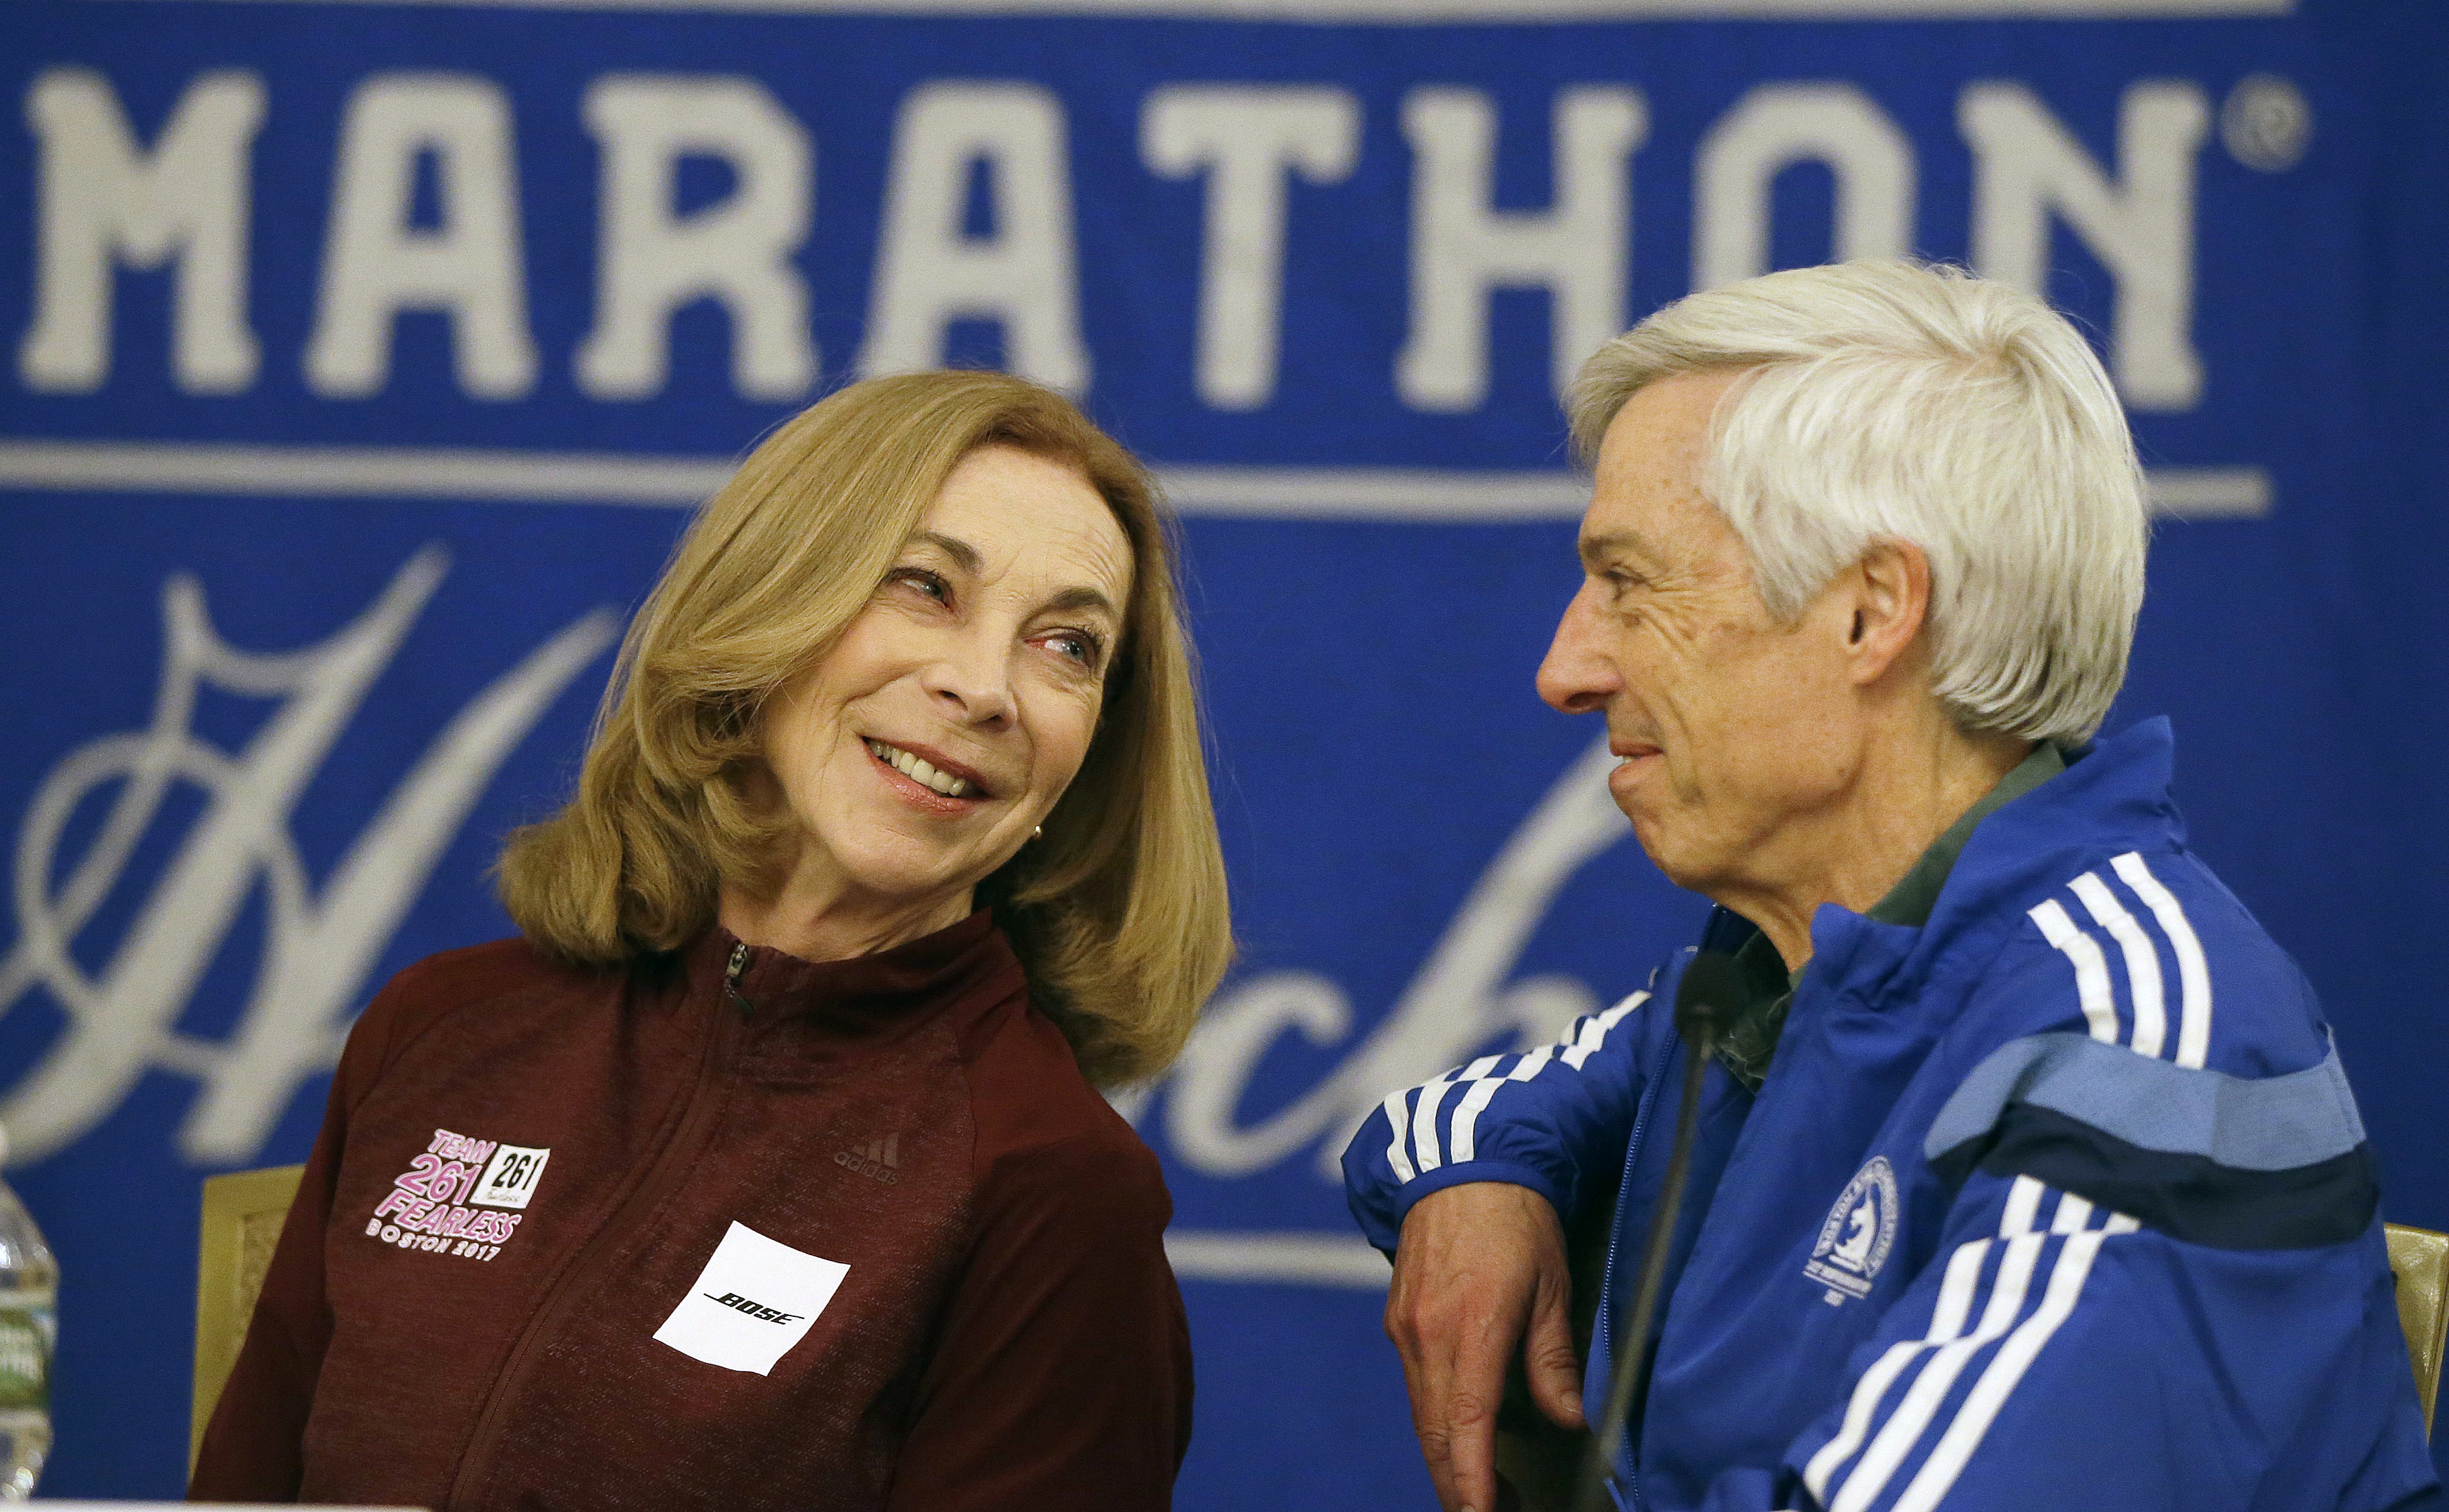 Kathrine Switzer talks with Ben Beach during a media availability at the Copley Plaza Hotel near the Boston Marathon finish line Thursday, April 13, 2017, in Boston. Beach is on the verge of becoming the first person to run the Boston Marathon 50 consecutive times if he completes the race on Monday. Switzer was the first woman with a bib issued by the Boston Athletic Association to finish the Boston Marathon in 1967. (AP Photo/Stephan Savoia)